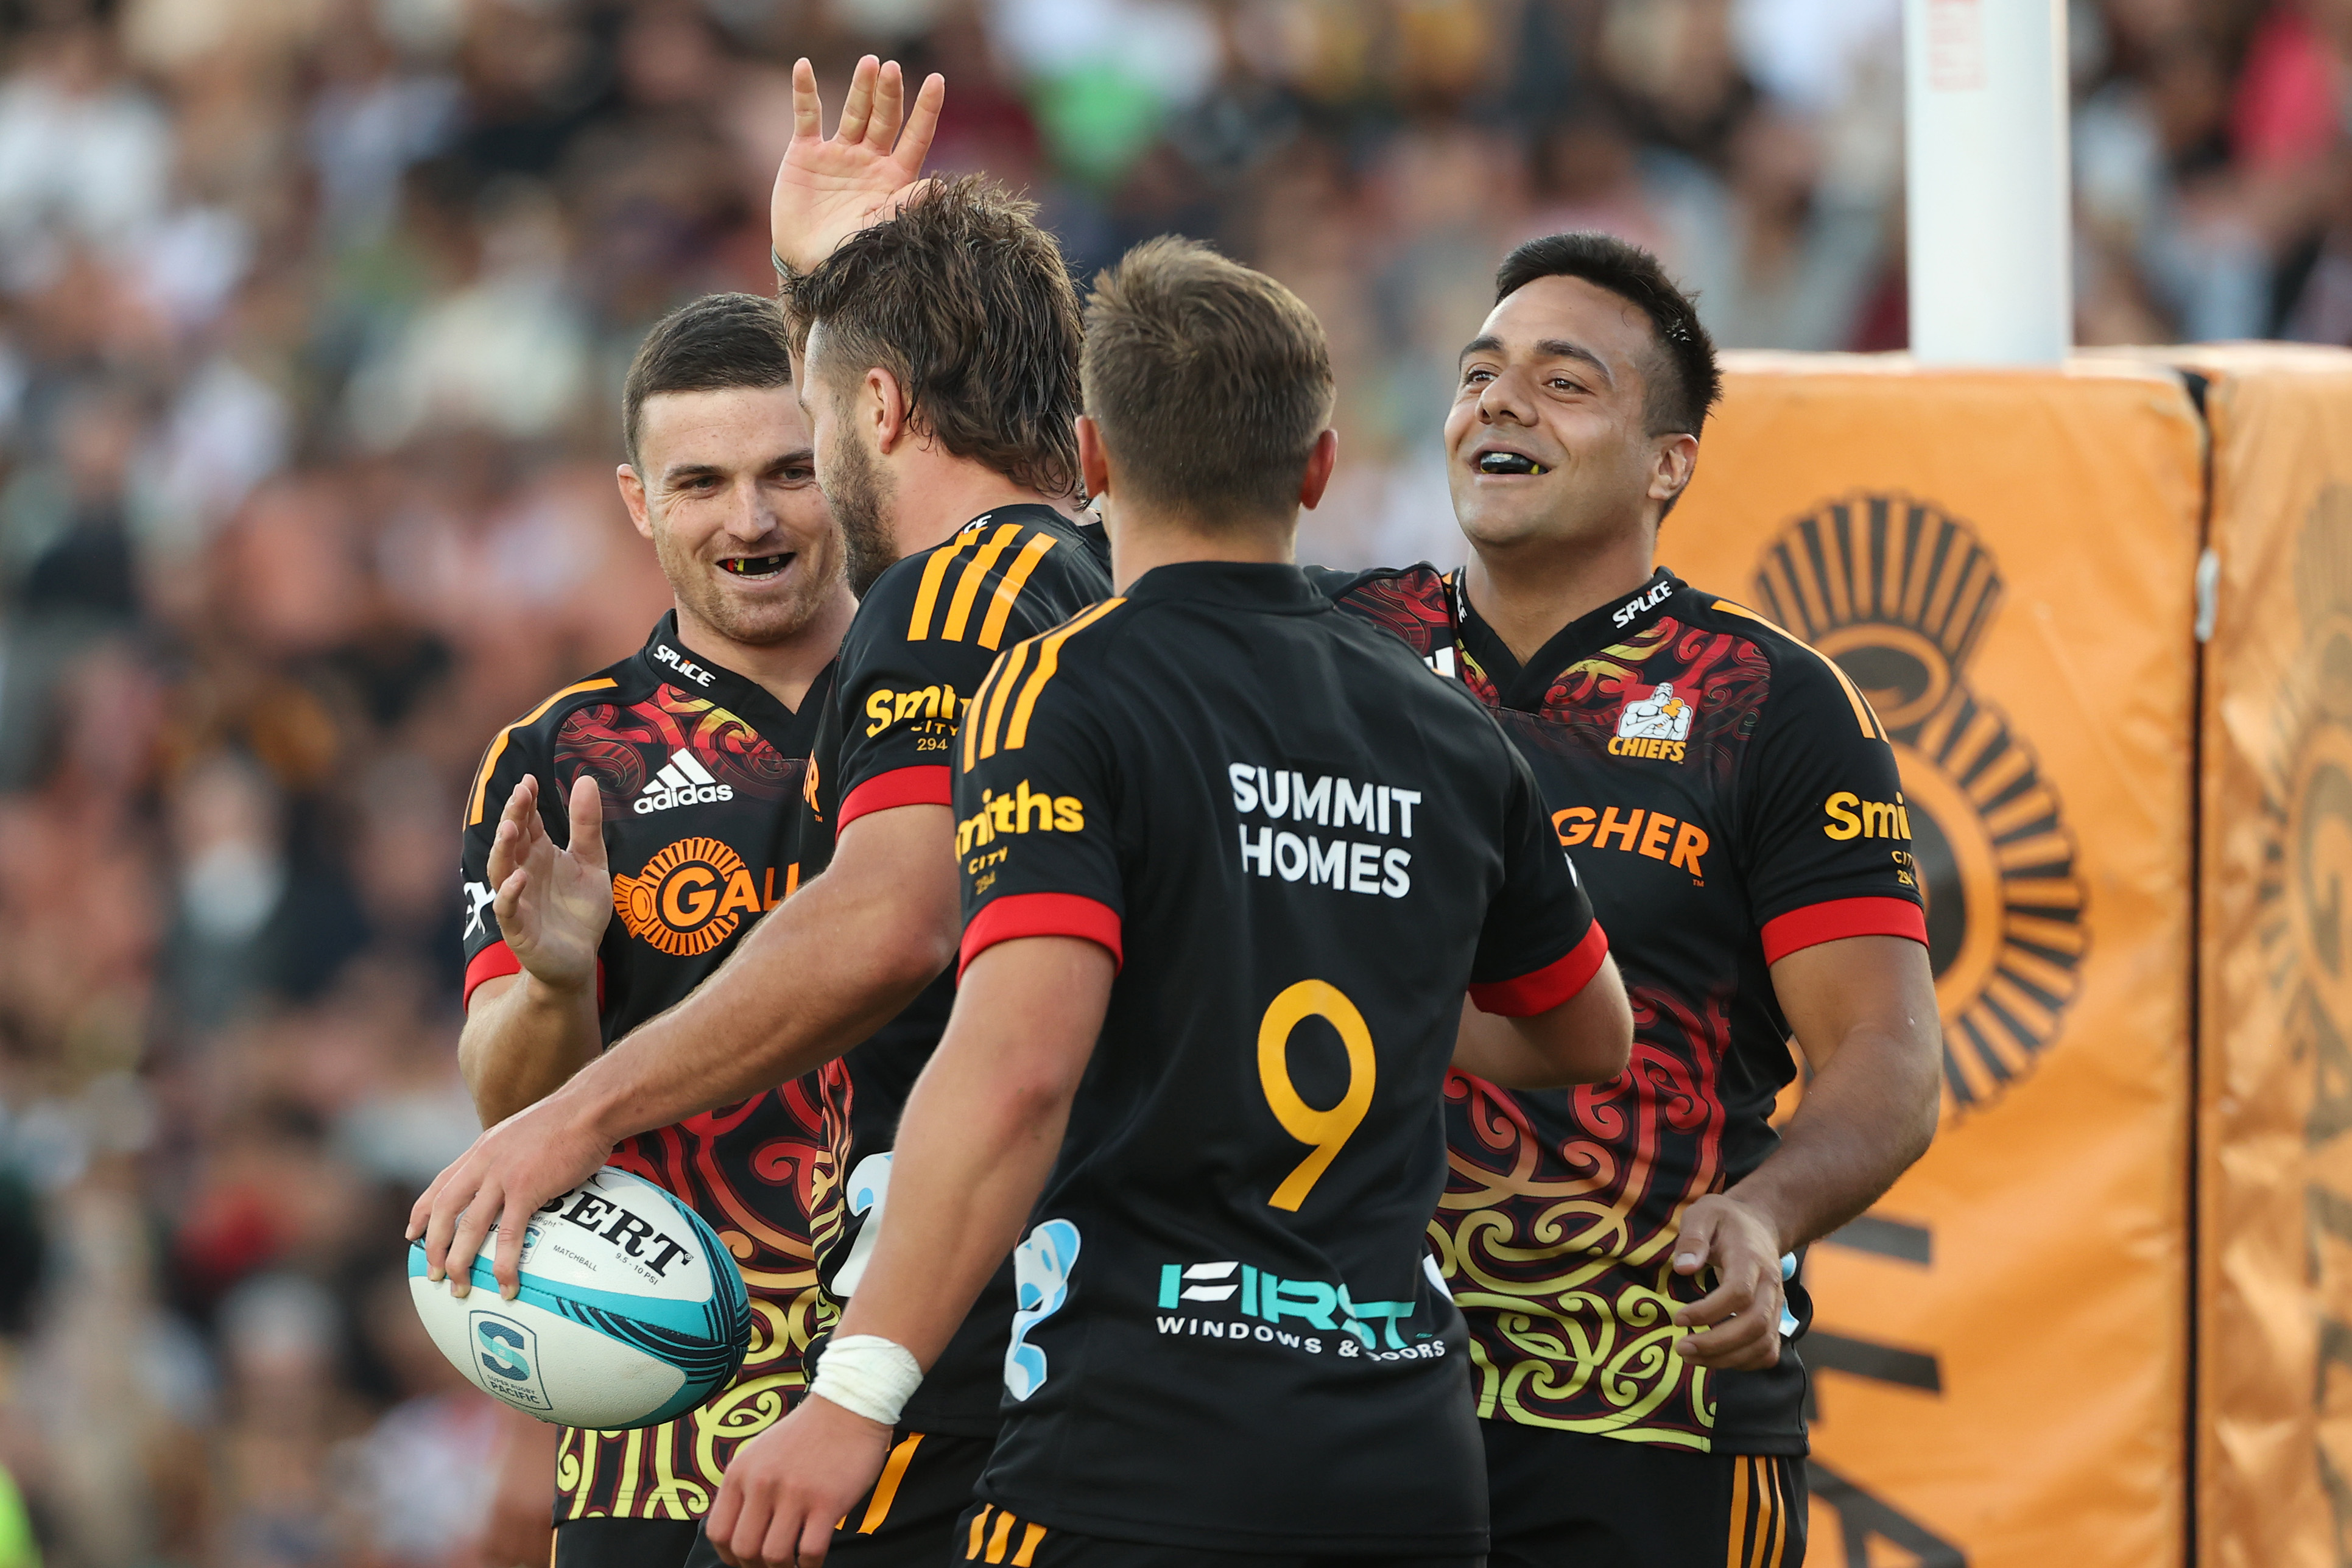 Hurricanes face Super Rugby litmus test against Chiefs